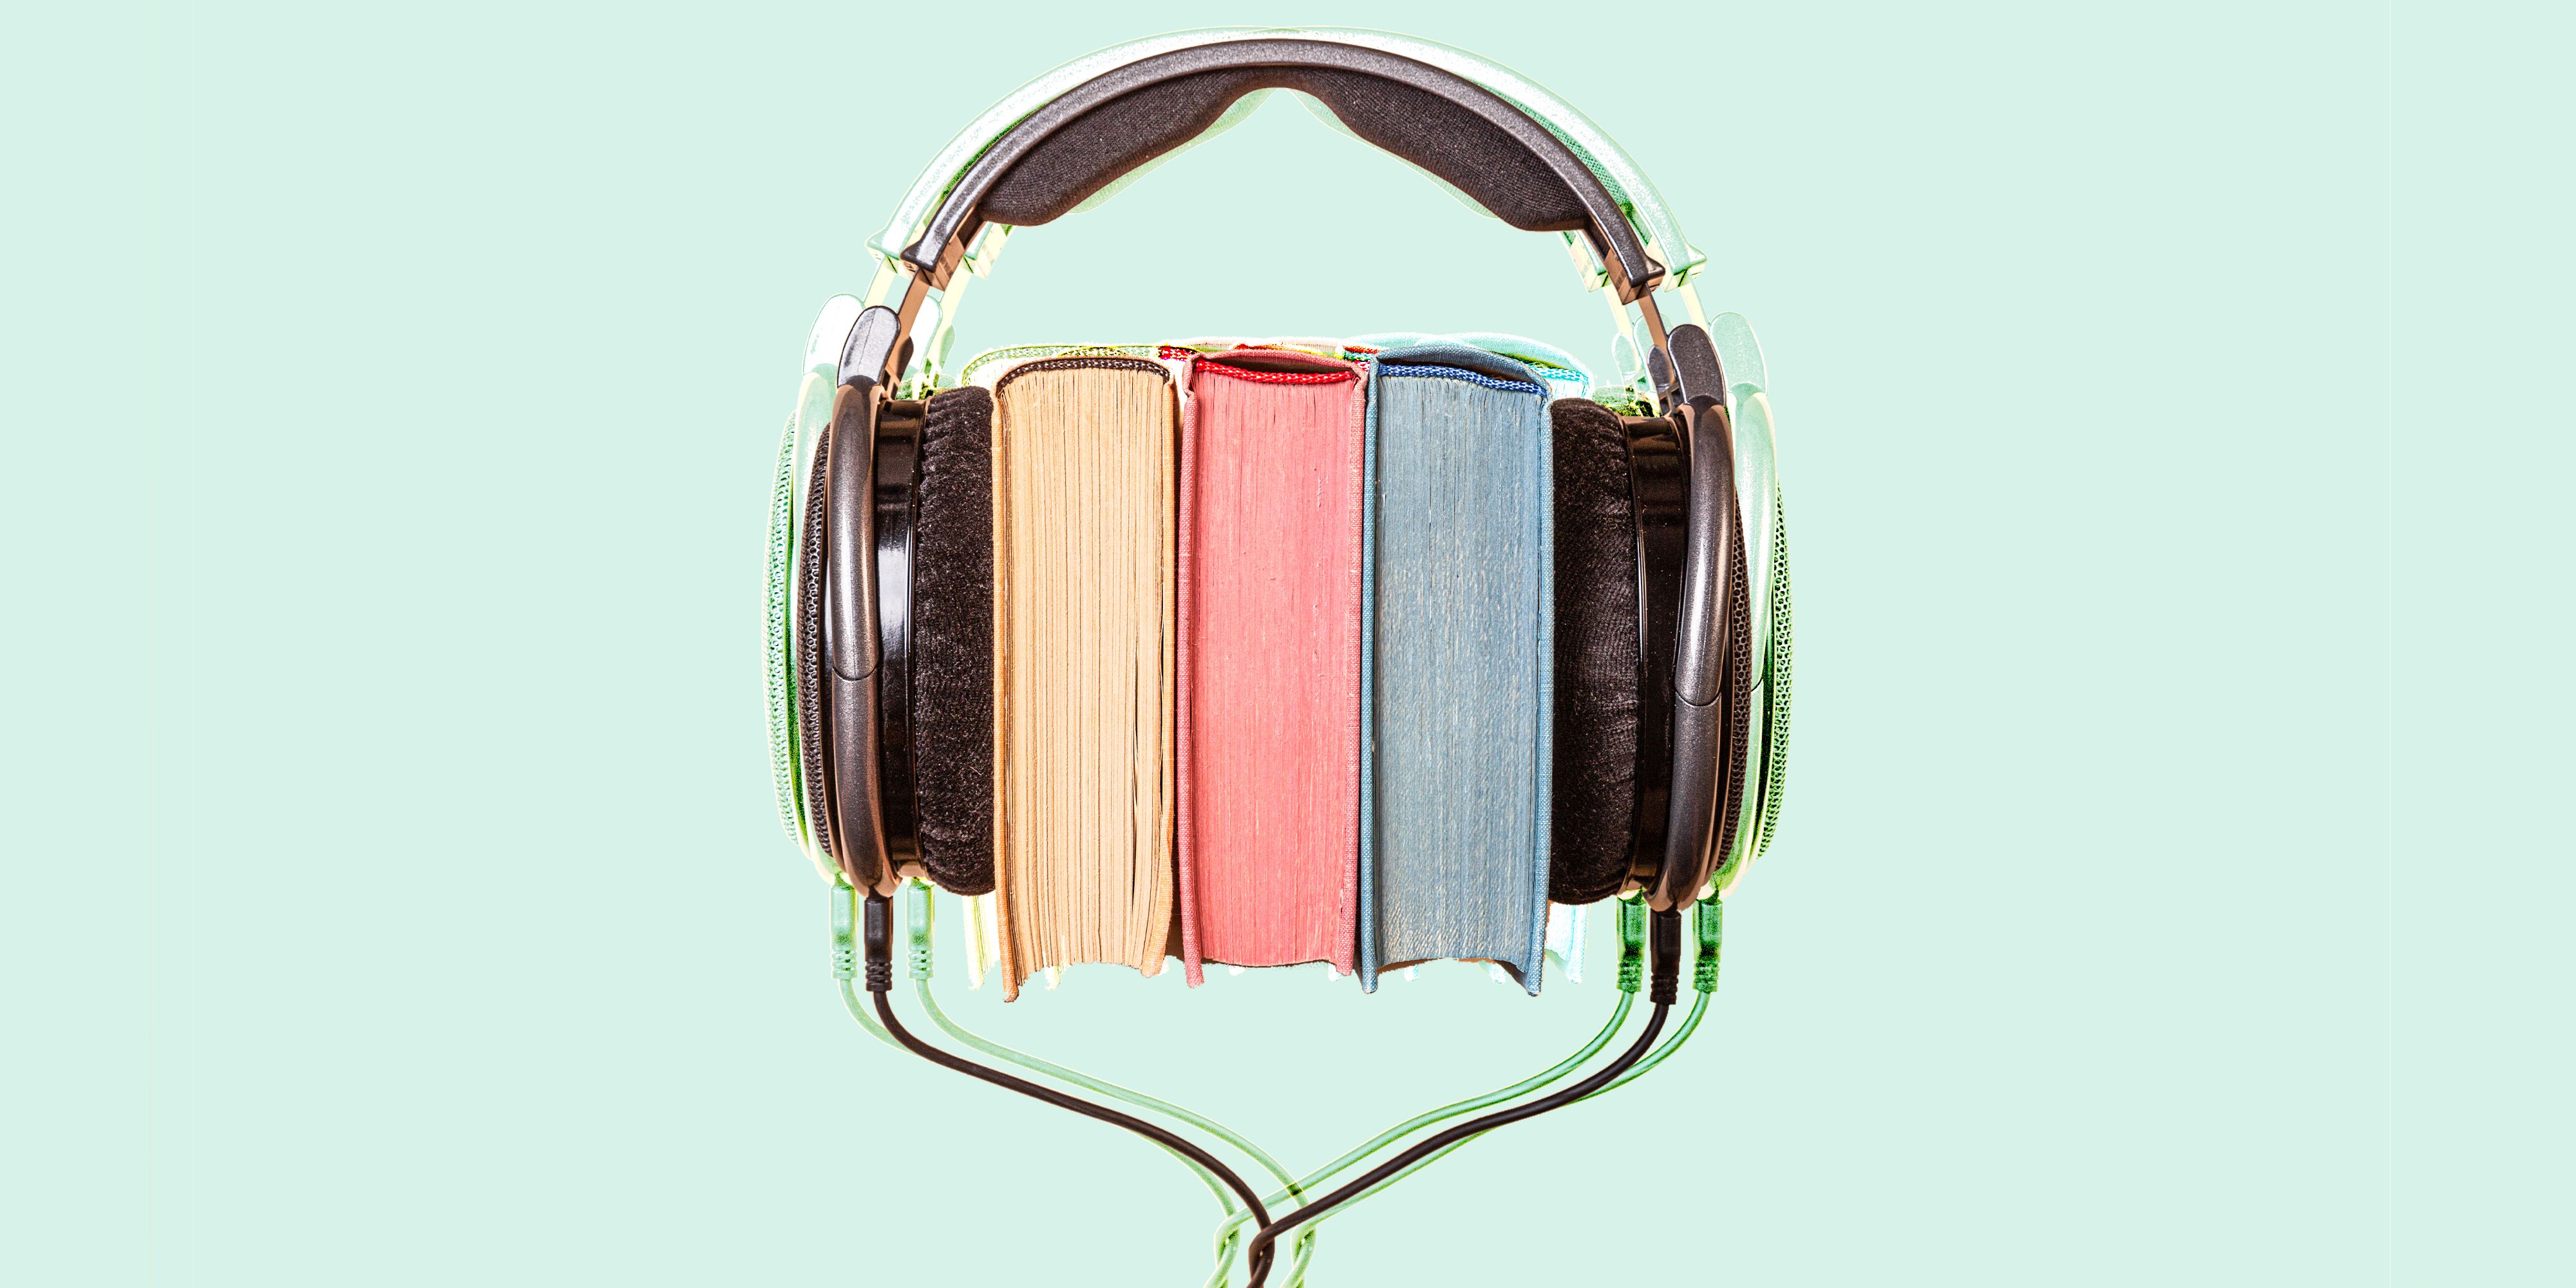 30 Best Audiobooks of All Time - Popular Books to Listen To